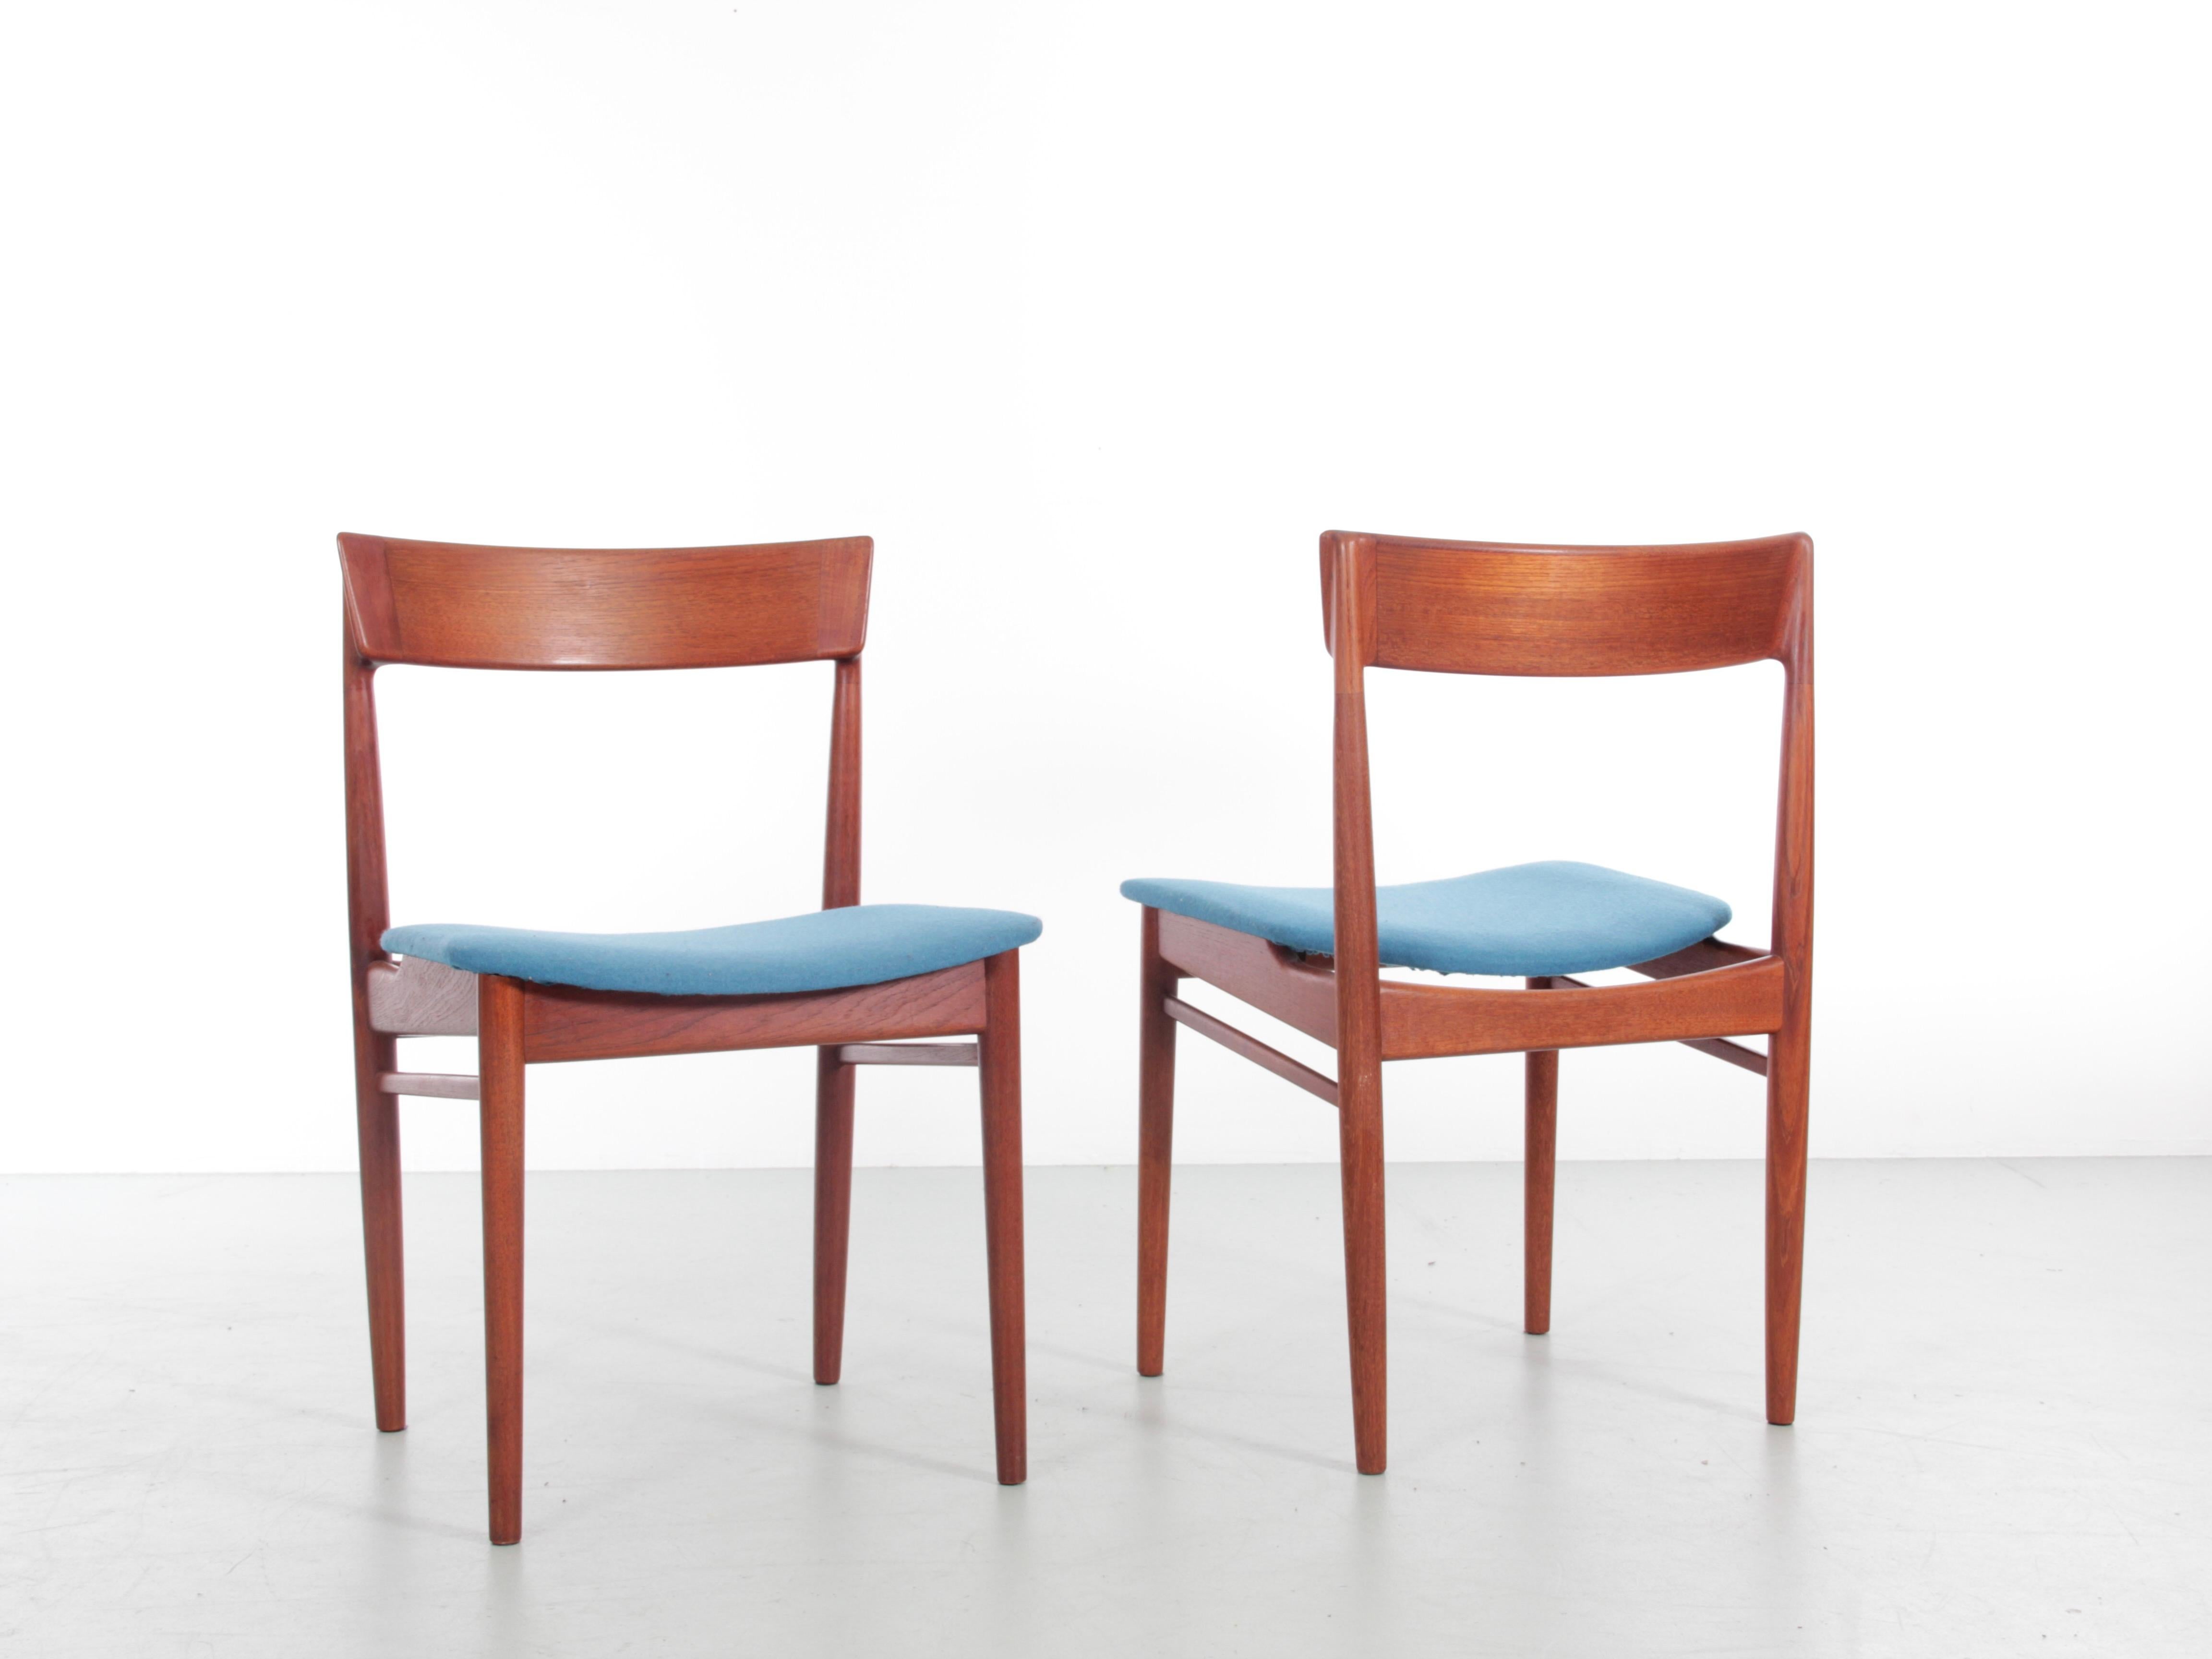 Mid-Century Modern Scandinavian set of 2 chairs in solid teak by Harry Rosengren Hansen for Brande Møbelindustri. Original edition from 1960. Referenced by the Design Museum Danmark under number RP00896. Litterature : Mobilia 1960 & 1961.